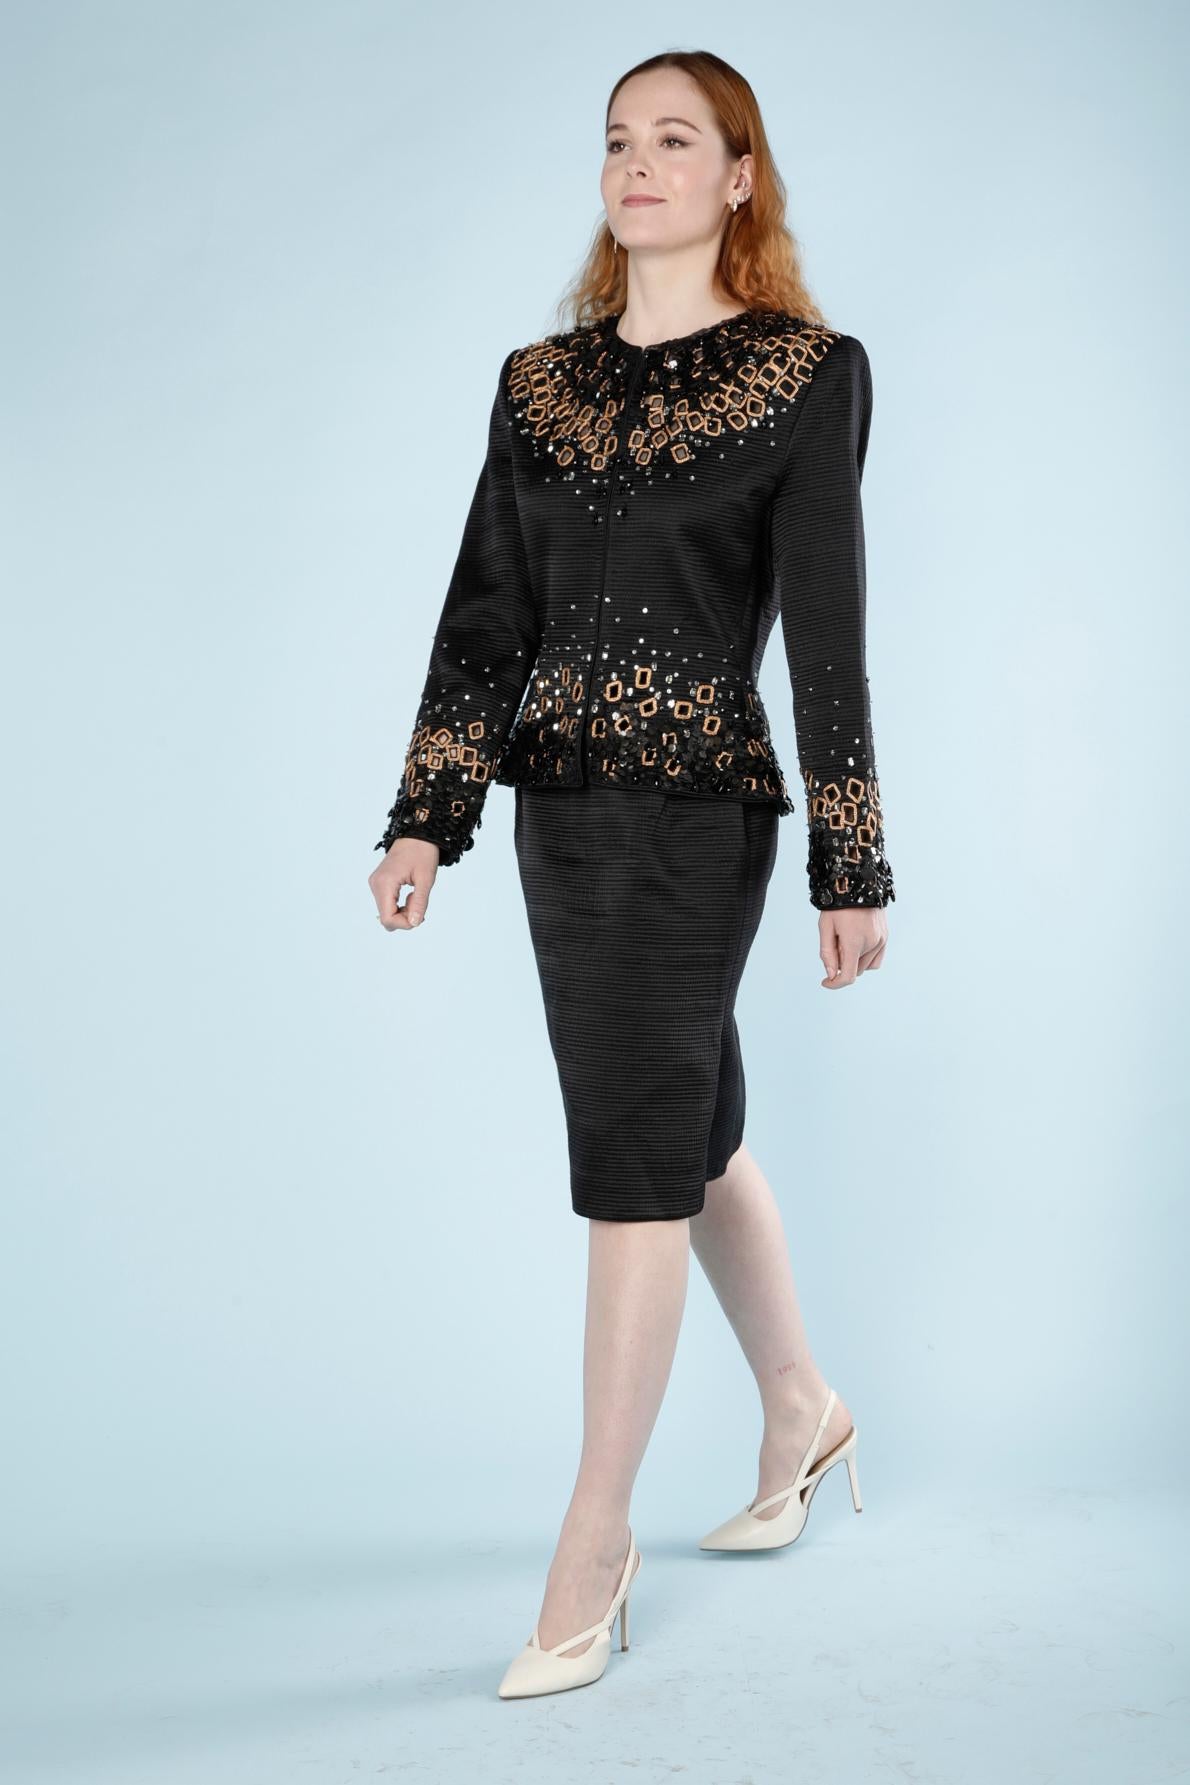 Evening skirt suit with sequin ,rhinestone embroidered and gold threads.
Mary McFadden for Neiman Marcus 
SIZE 38
